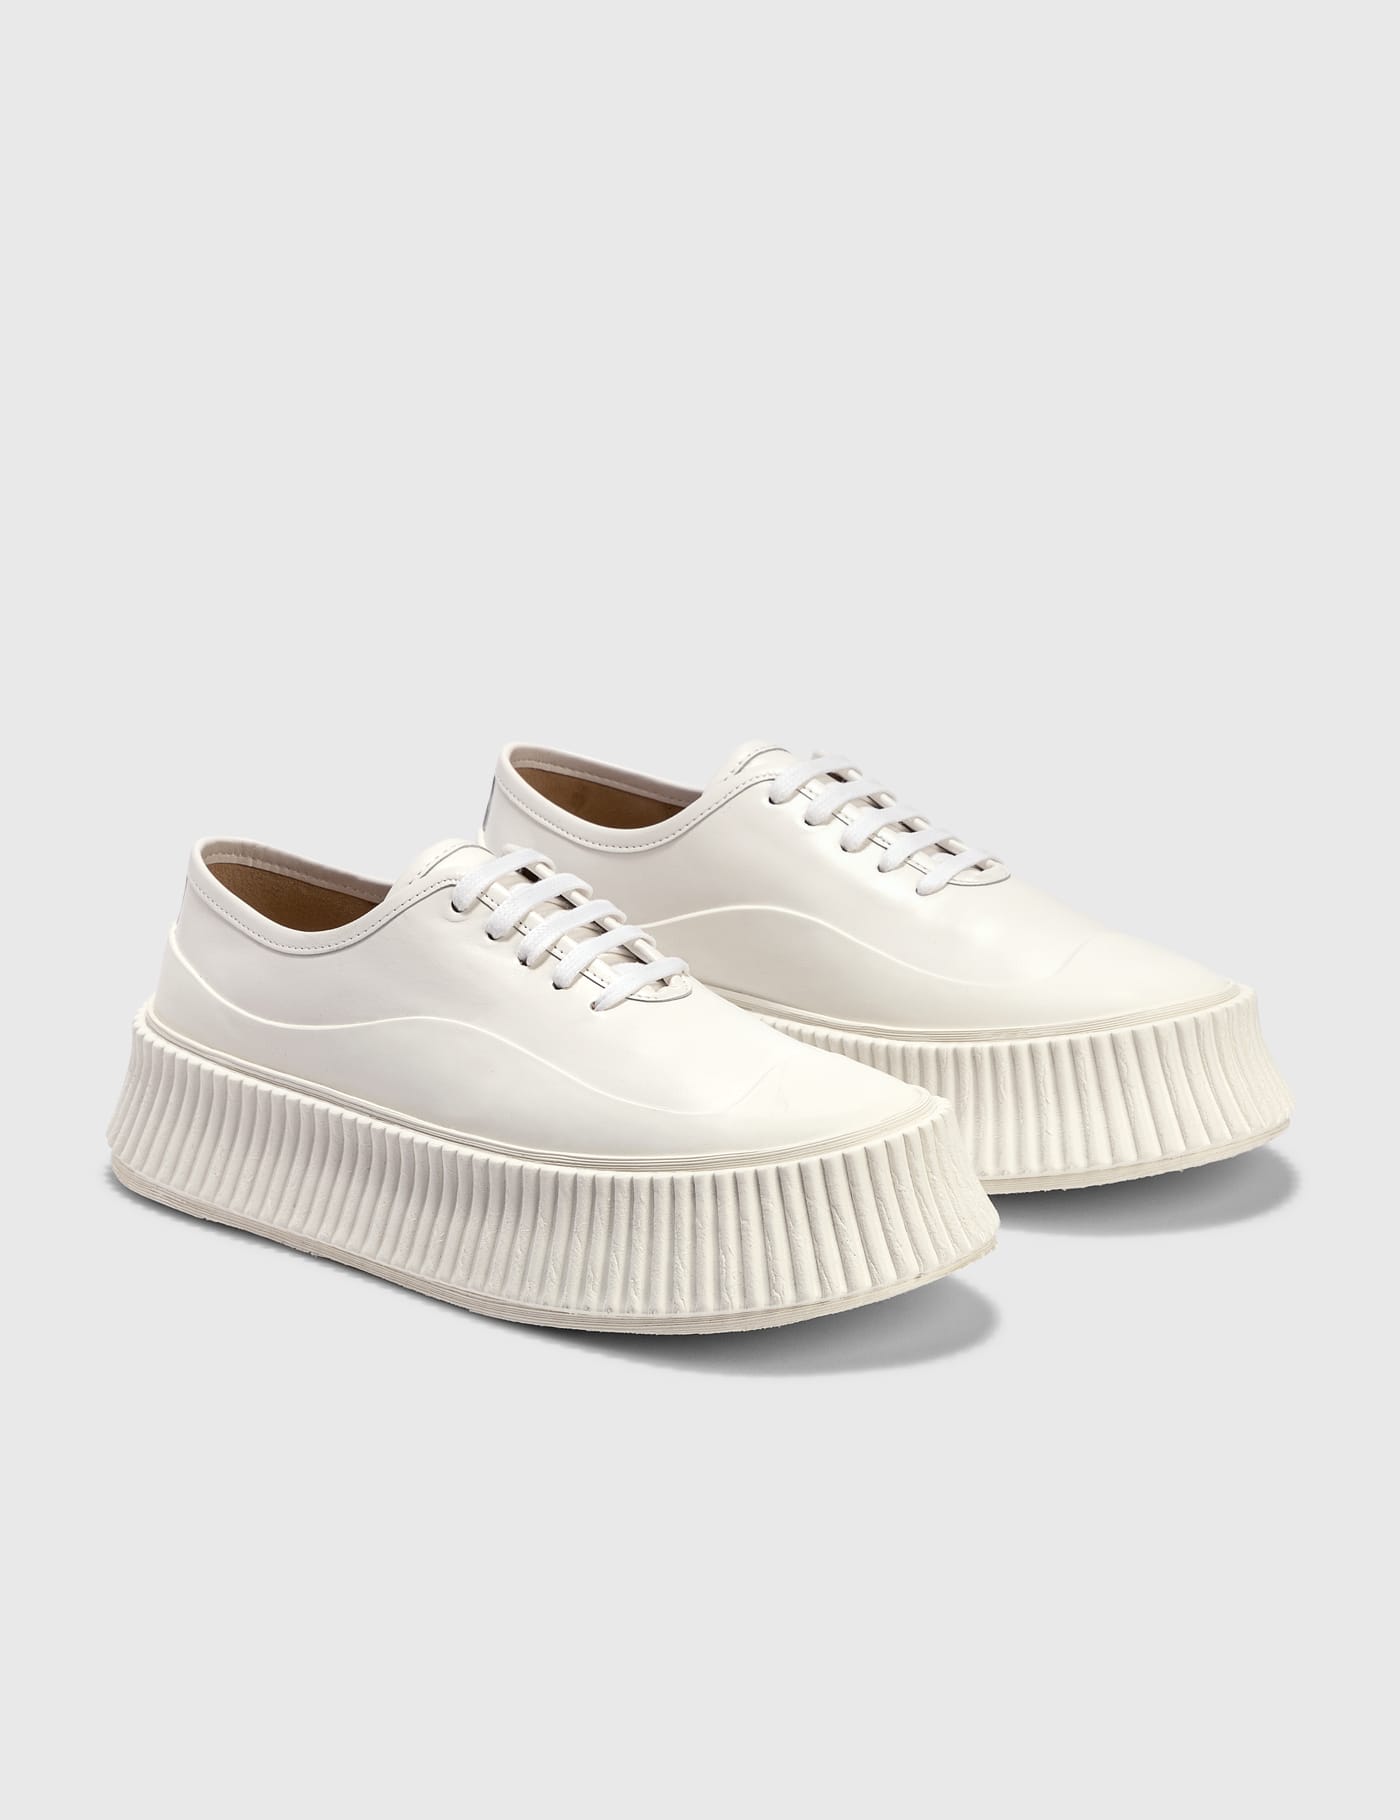 Jil Sander - Padded Low-top Leather Sneaker | HBX - Globally Curated  Fashion and Lifestyle by Hypebeast